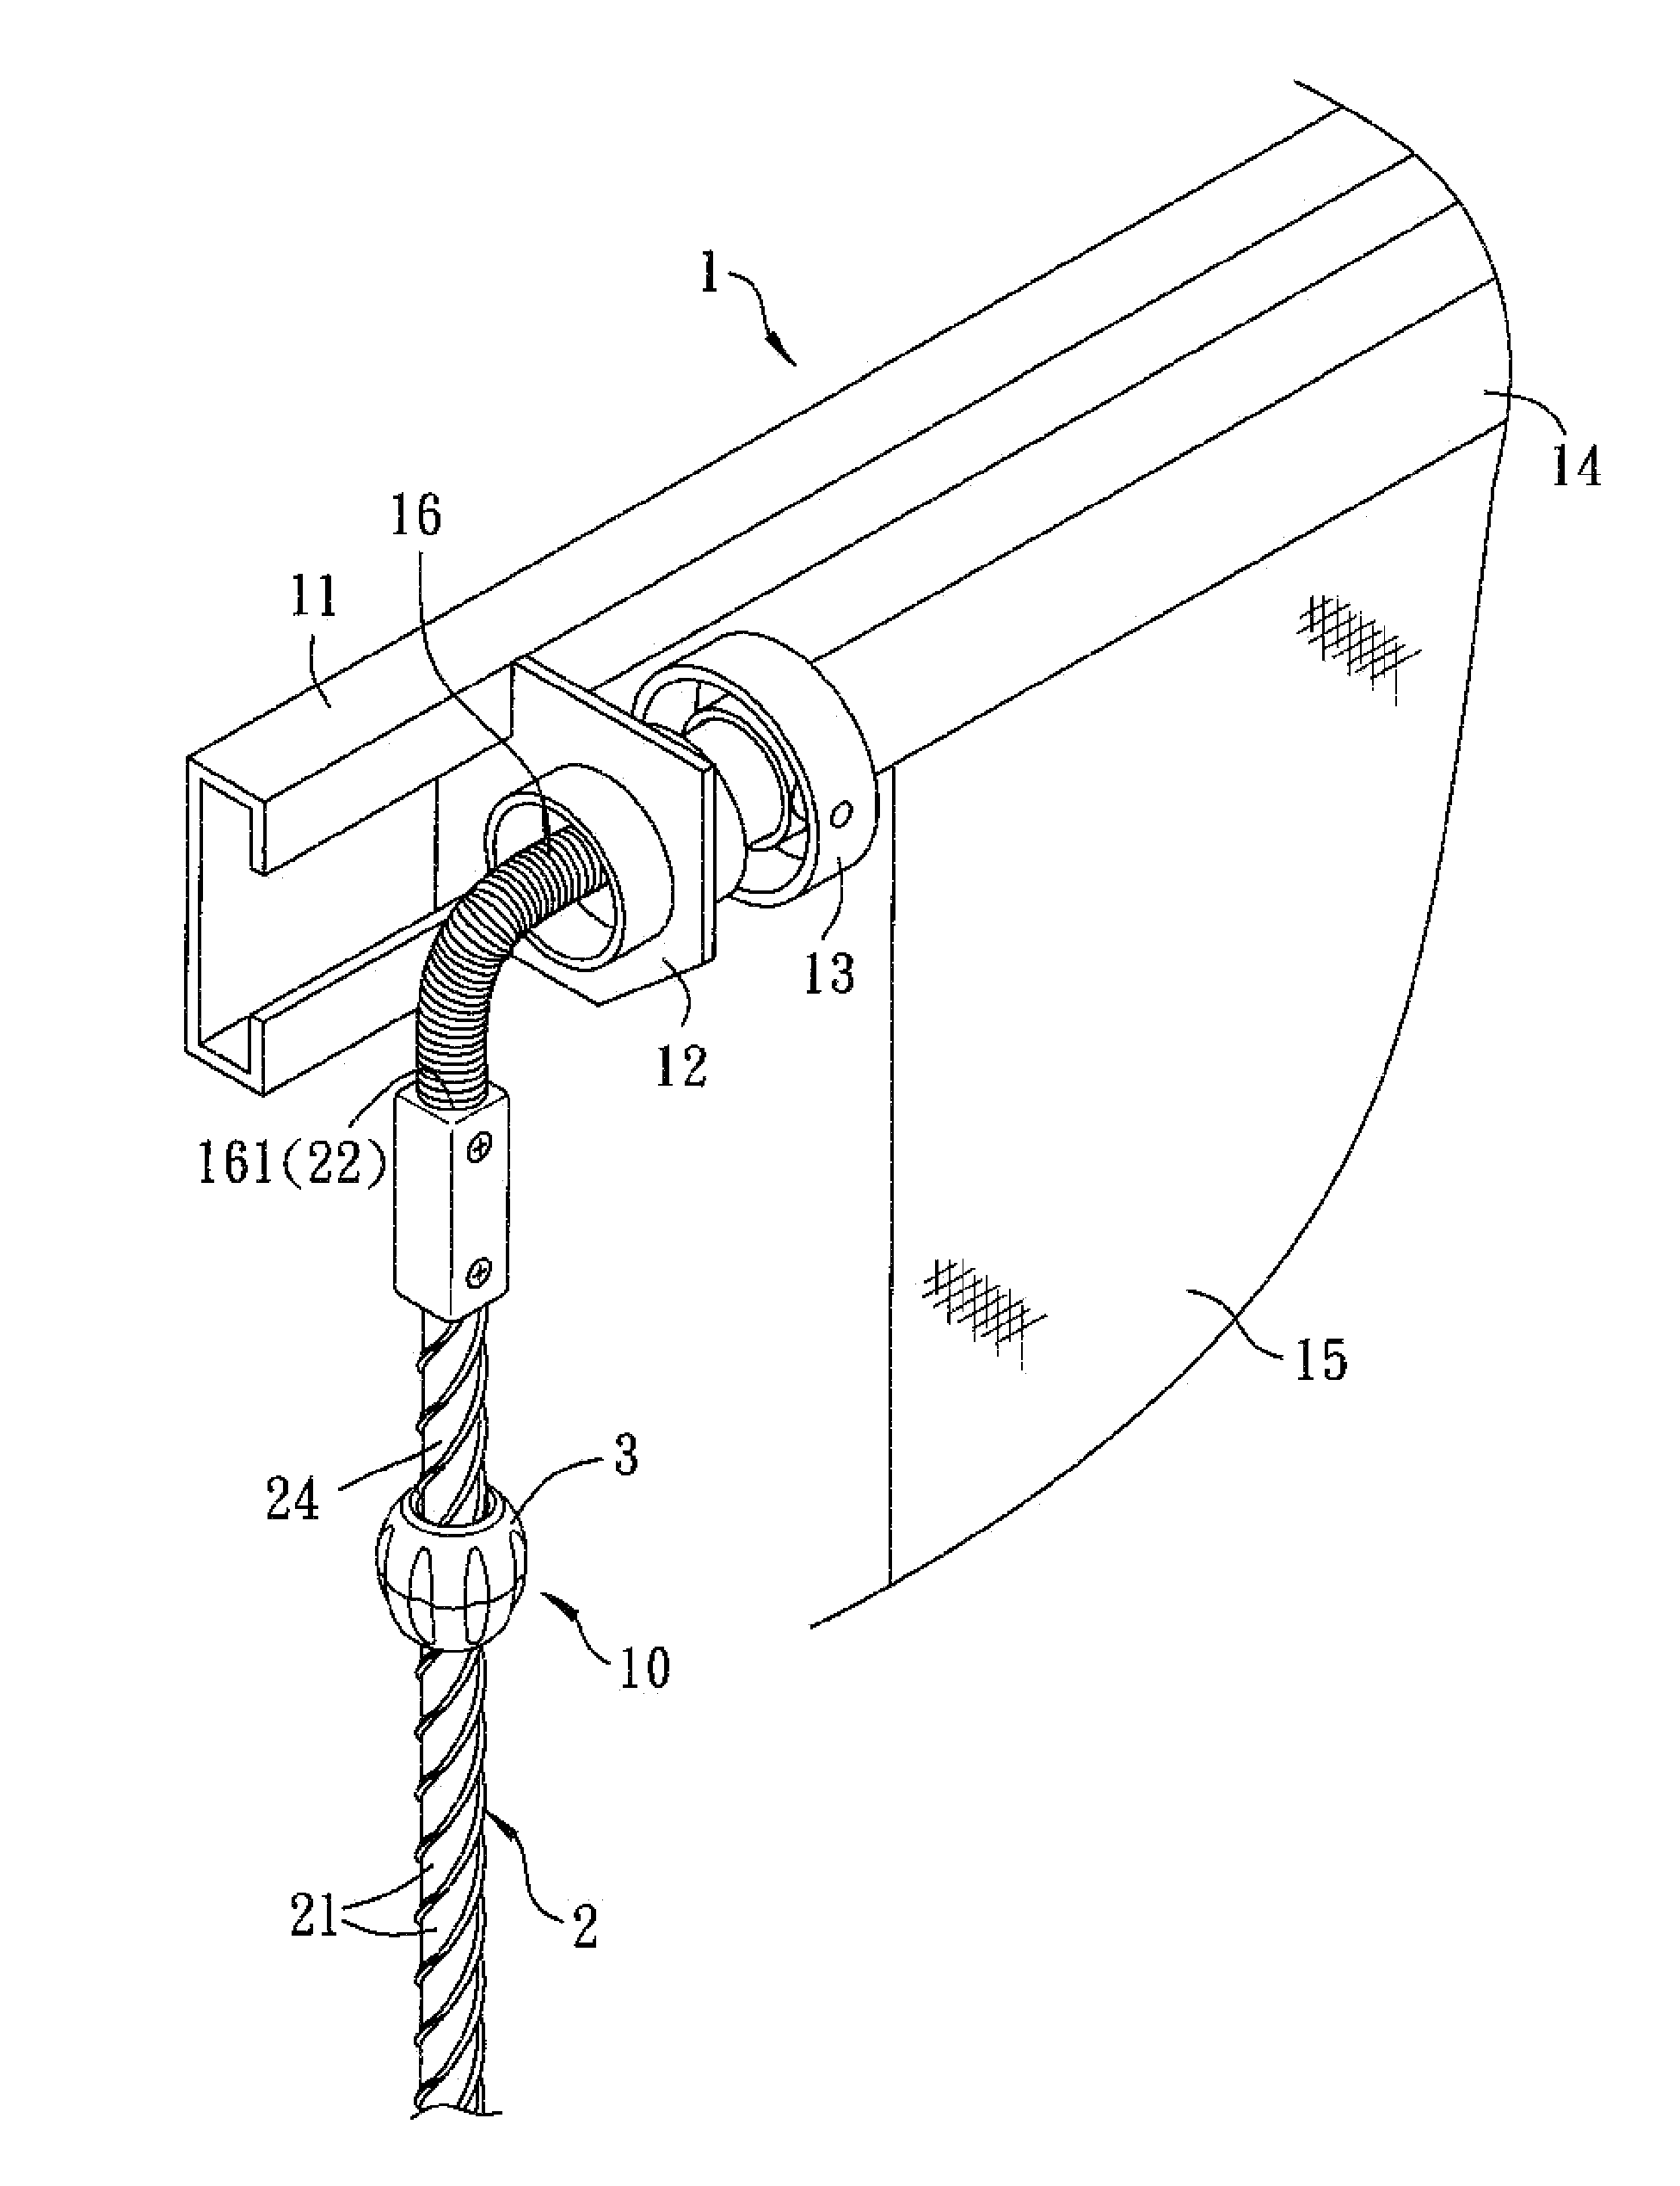 Operating device for rotating a winding roller of a window blind